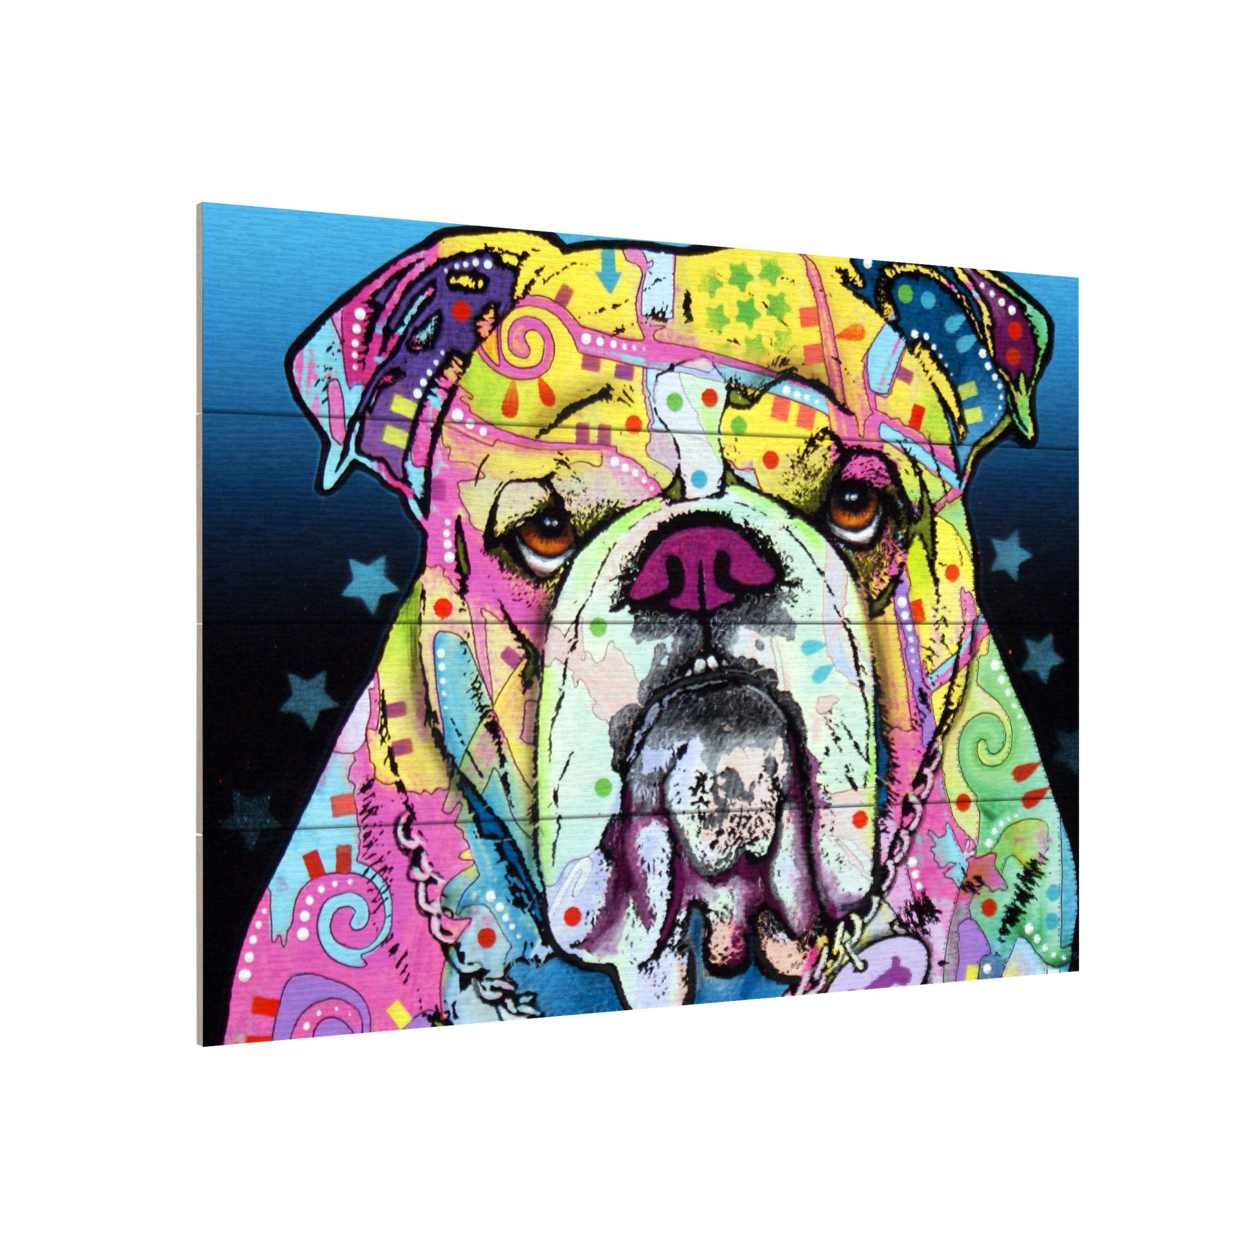 Wall Art 12 X 16 Inches Titled The Bulldog Ready To Hang Printed On Wooden Planks